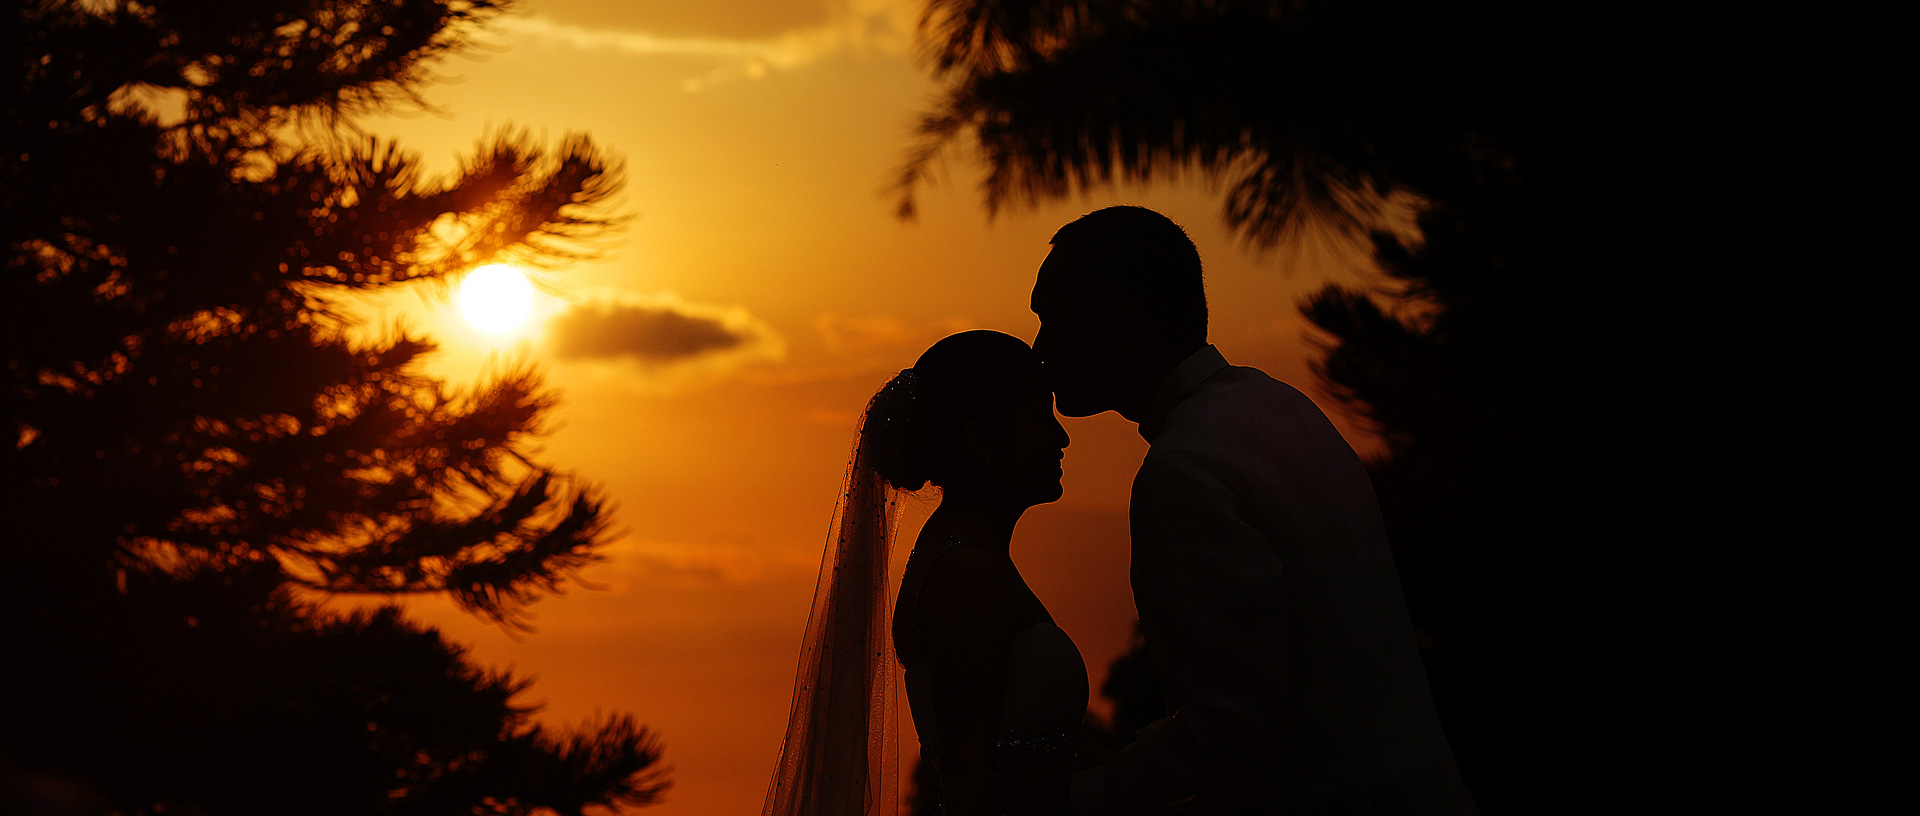 Vibrant Images by Jayson and Joanne Photography